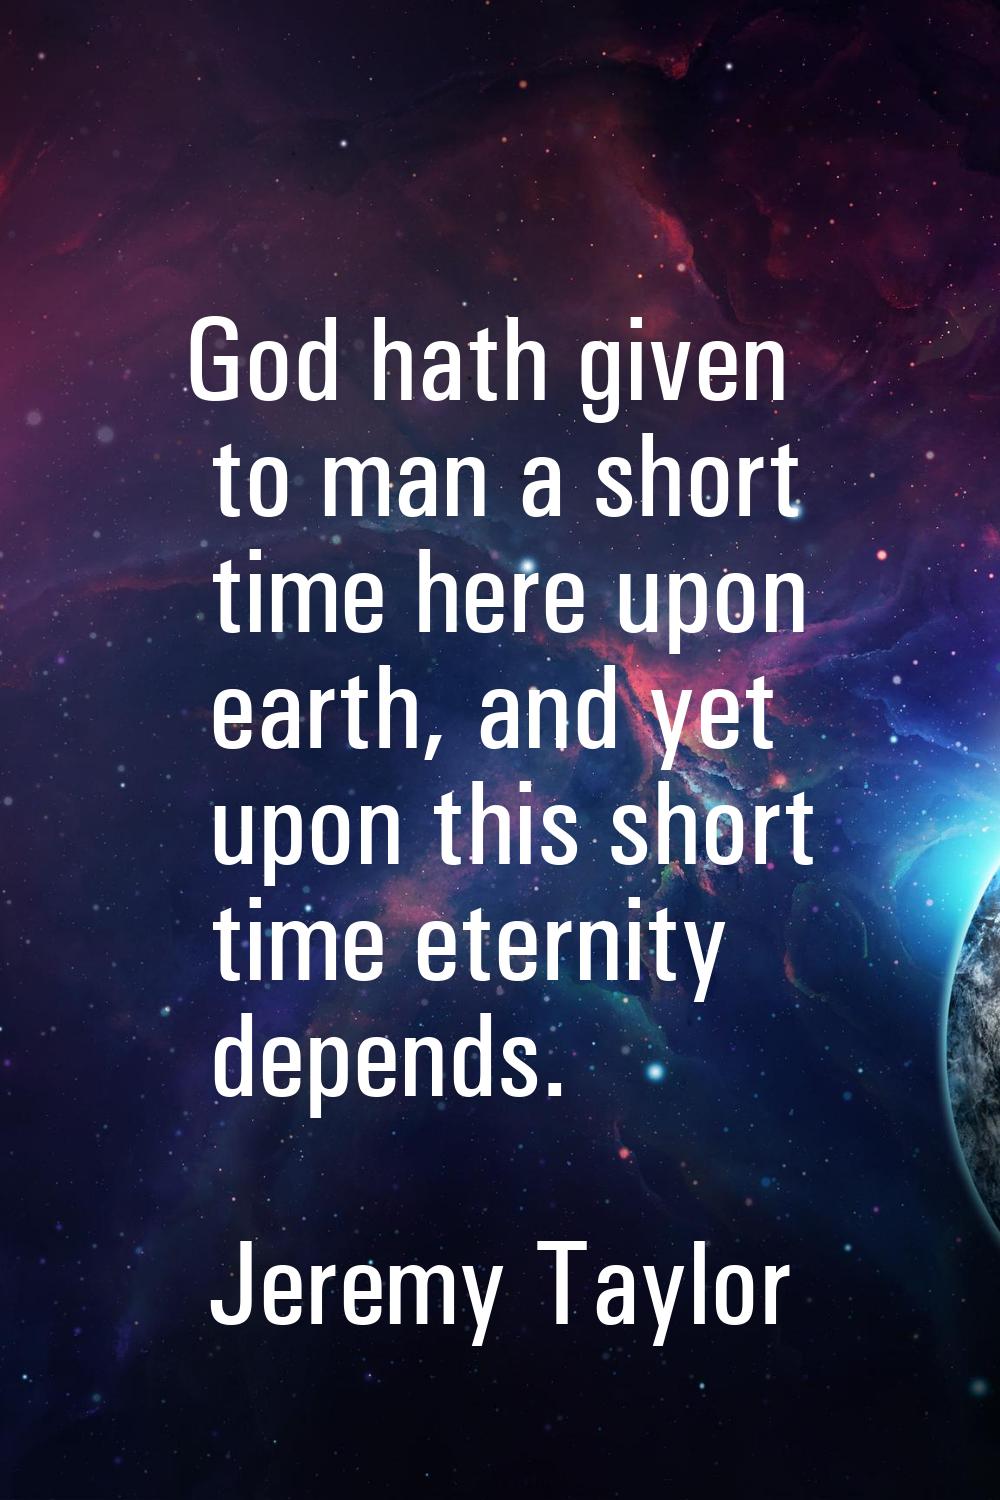 God hath given to man a short time here upon earth, and yet upon this short time eternity depends.